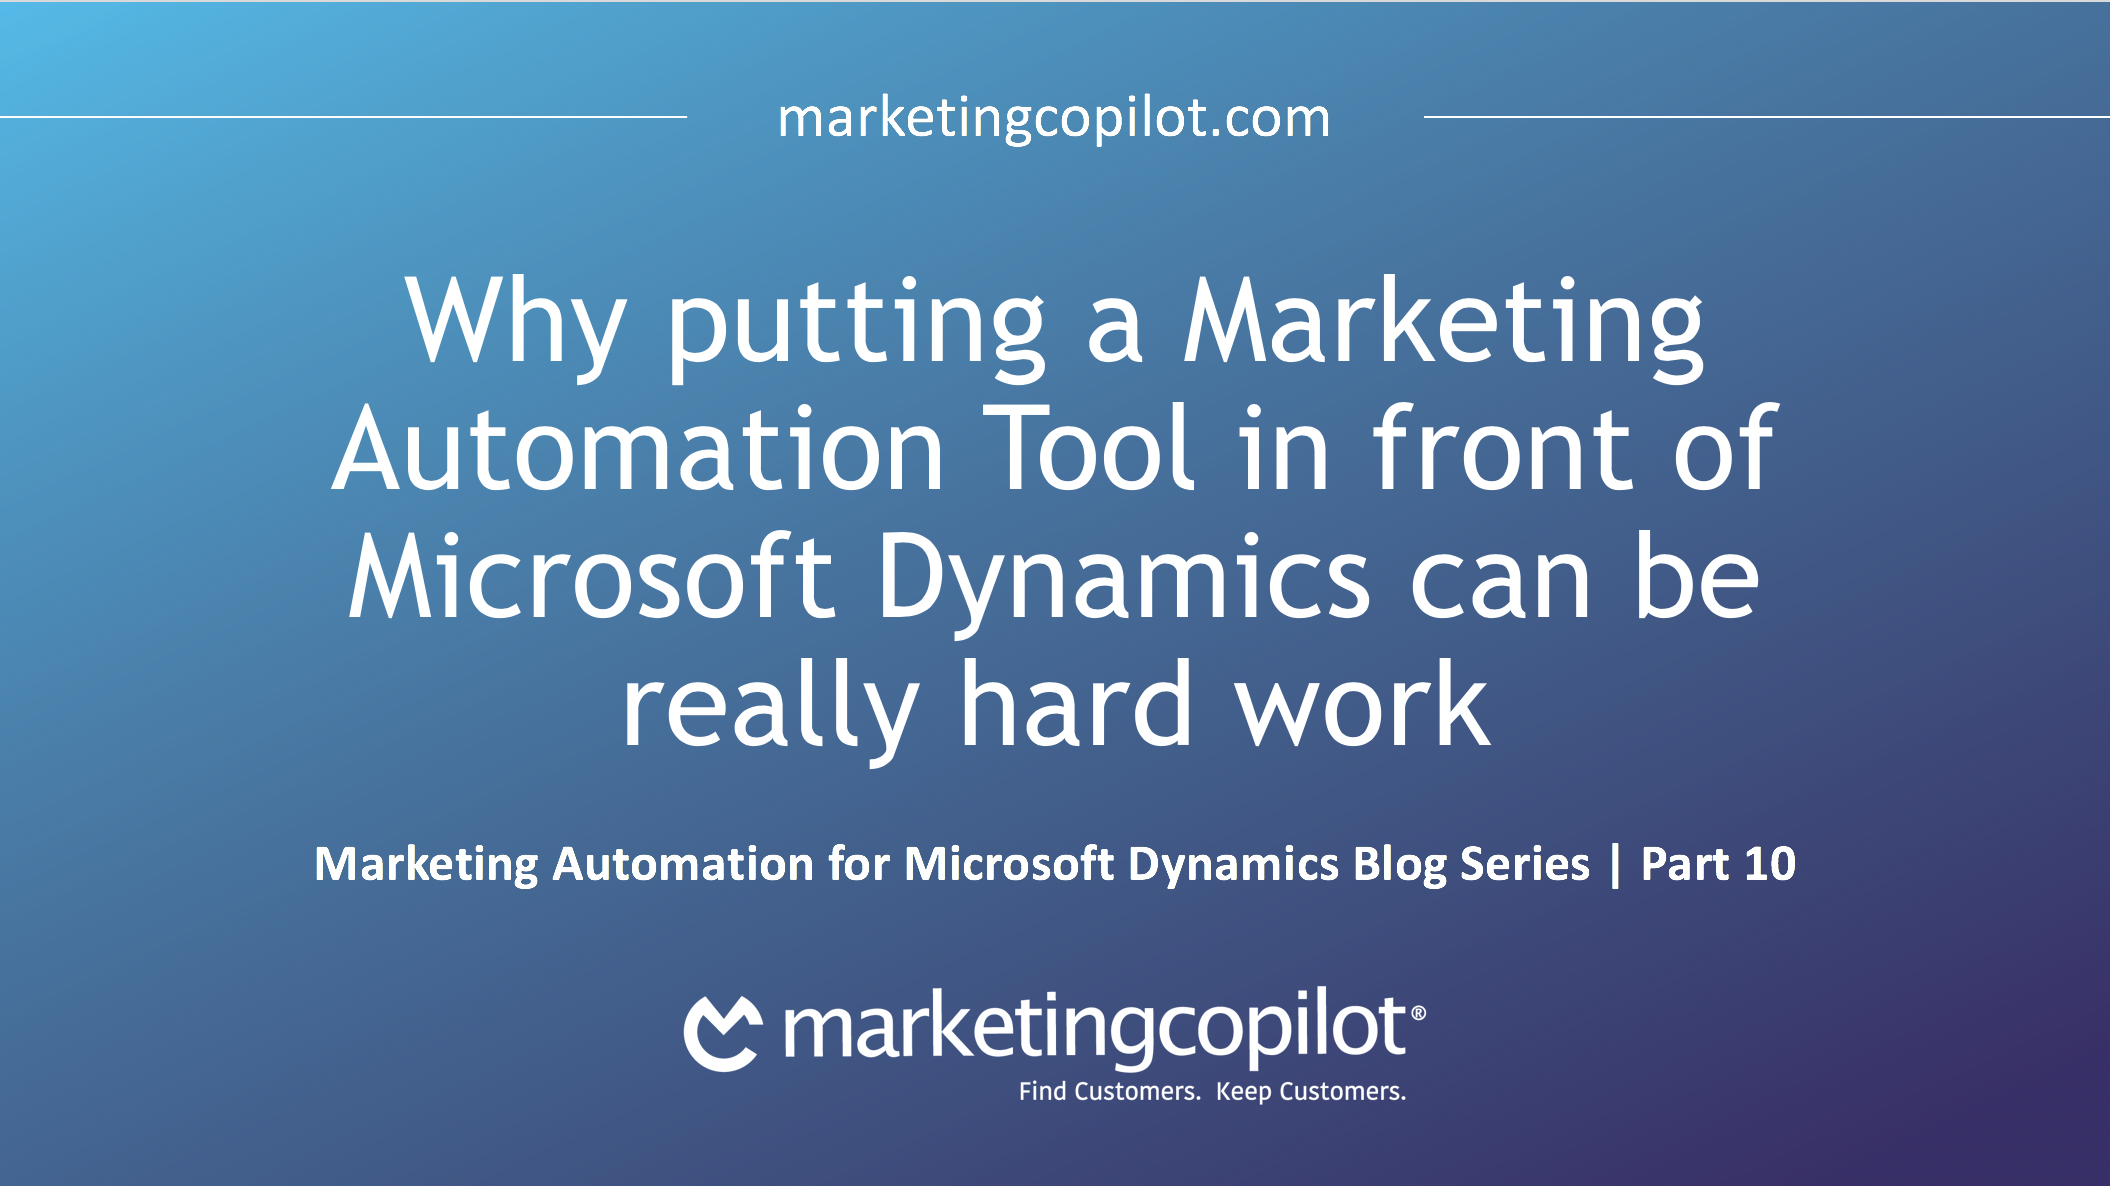 Why putting a Marketing Automation tool in front of Microsoft Dynamics can be really hard work